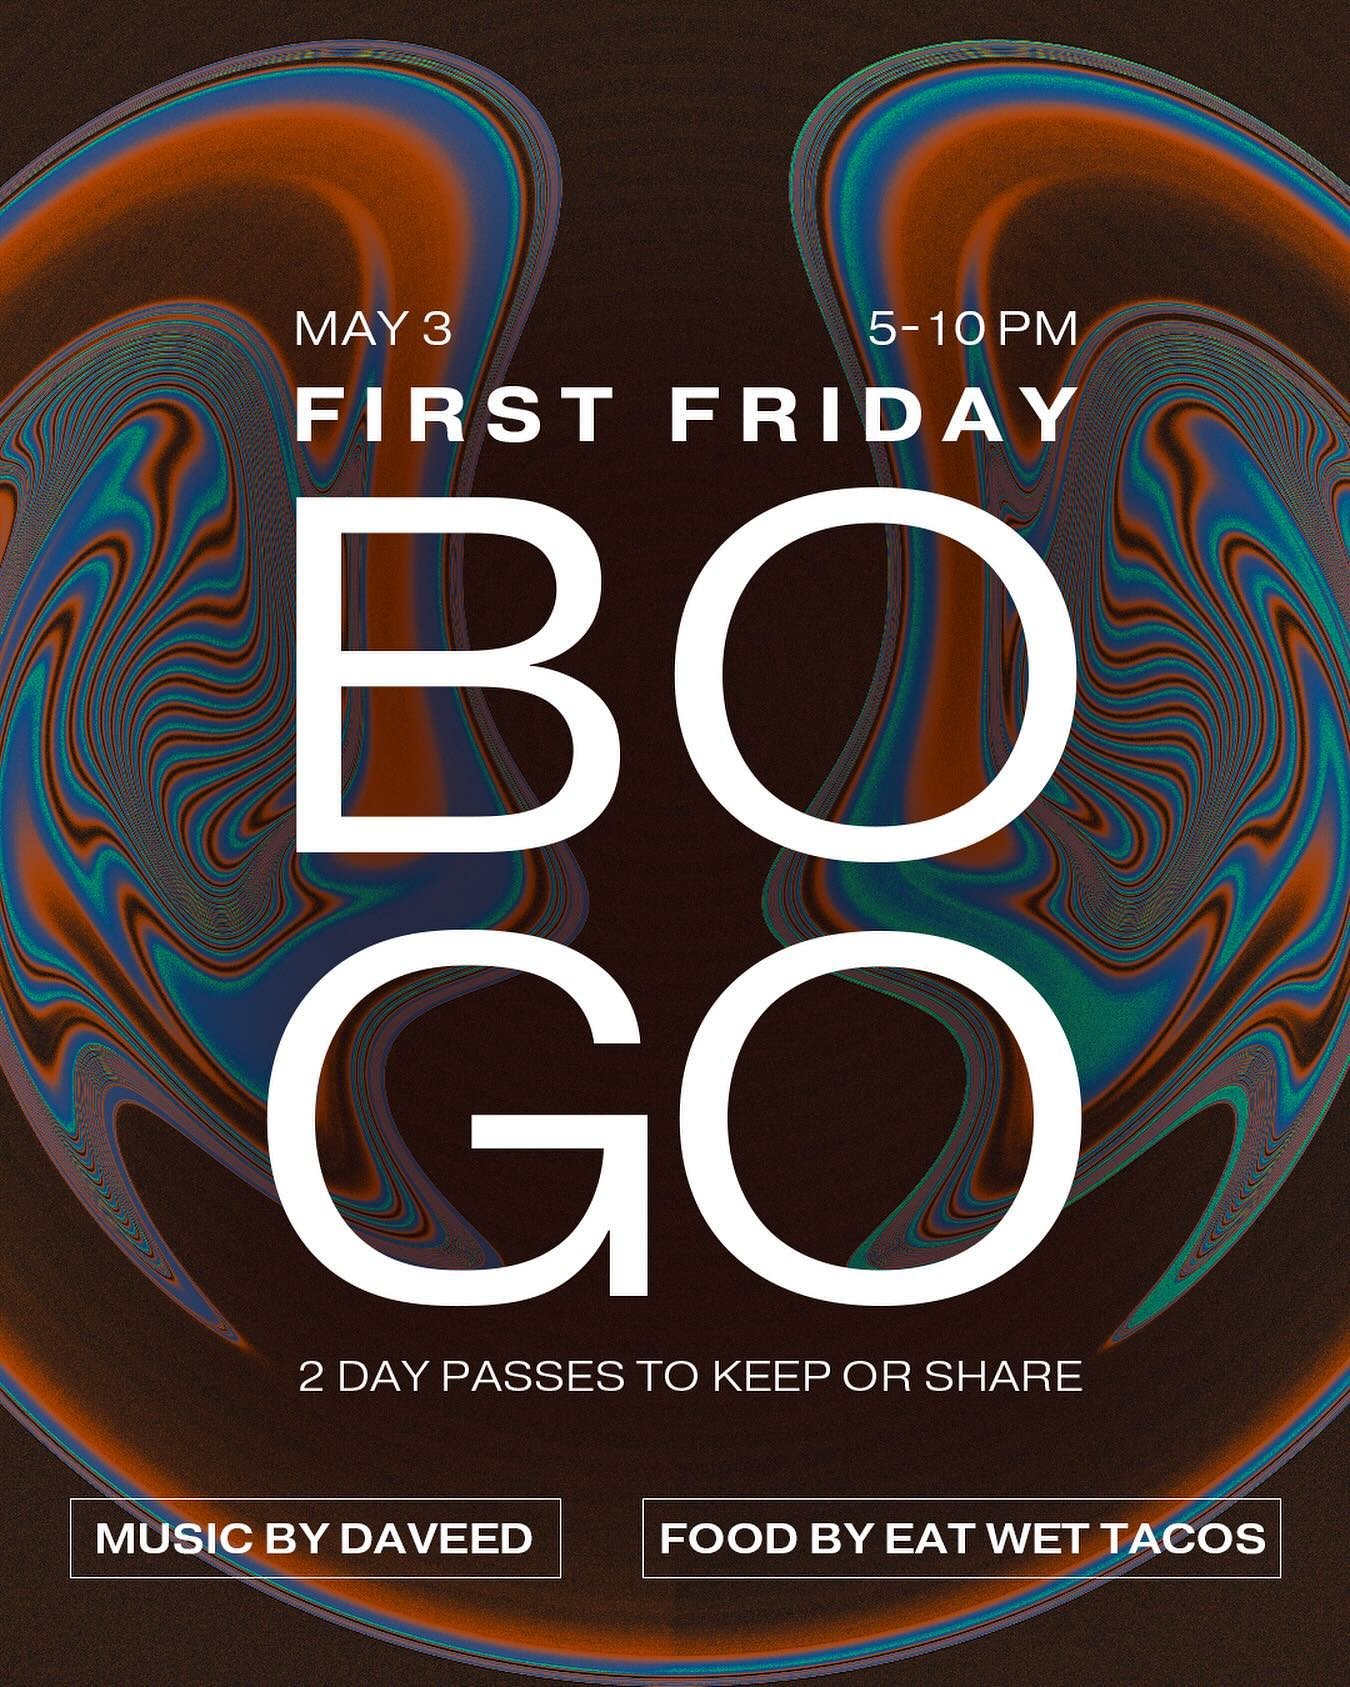 It&rsquo;s First Friday again! Come vibe with the community and enjoy a live DJ set by @davidjohnoks with delicious tacos from @eatwettacos. Bring a friend or snag an extra pass for yourself with Buy One, Get One day passes, get 2 entries for only $2